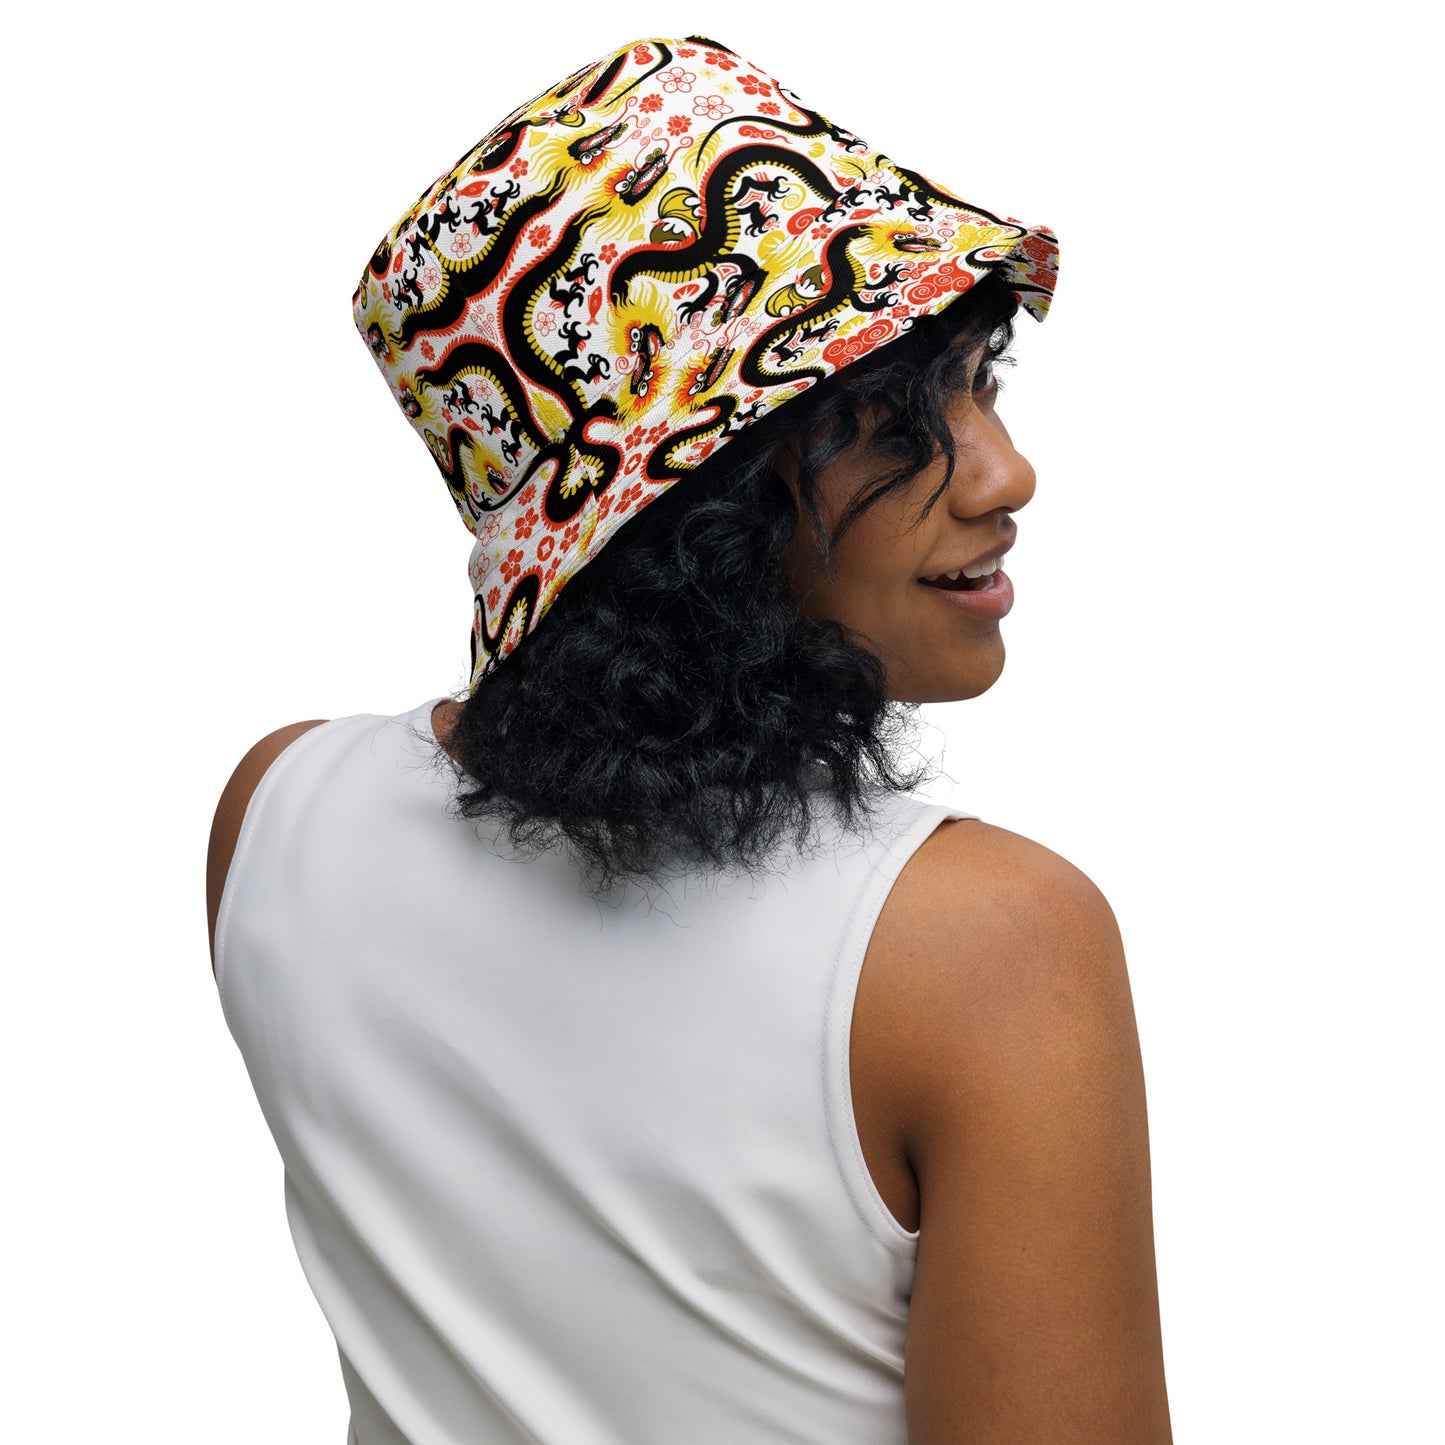 Legendary chinese dragons pattern art Reversible bucket hat. Overview